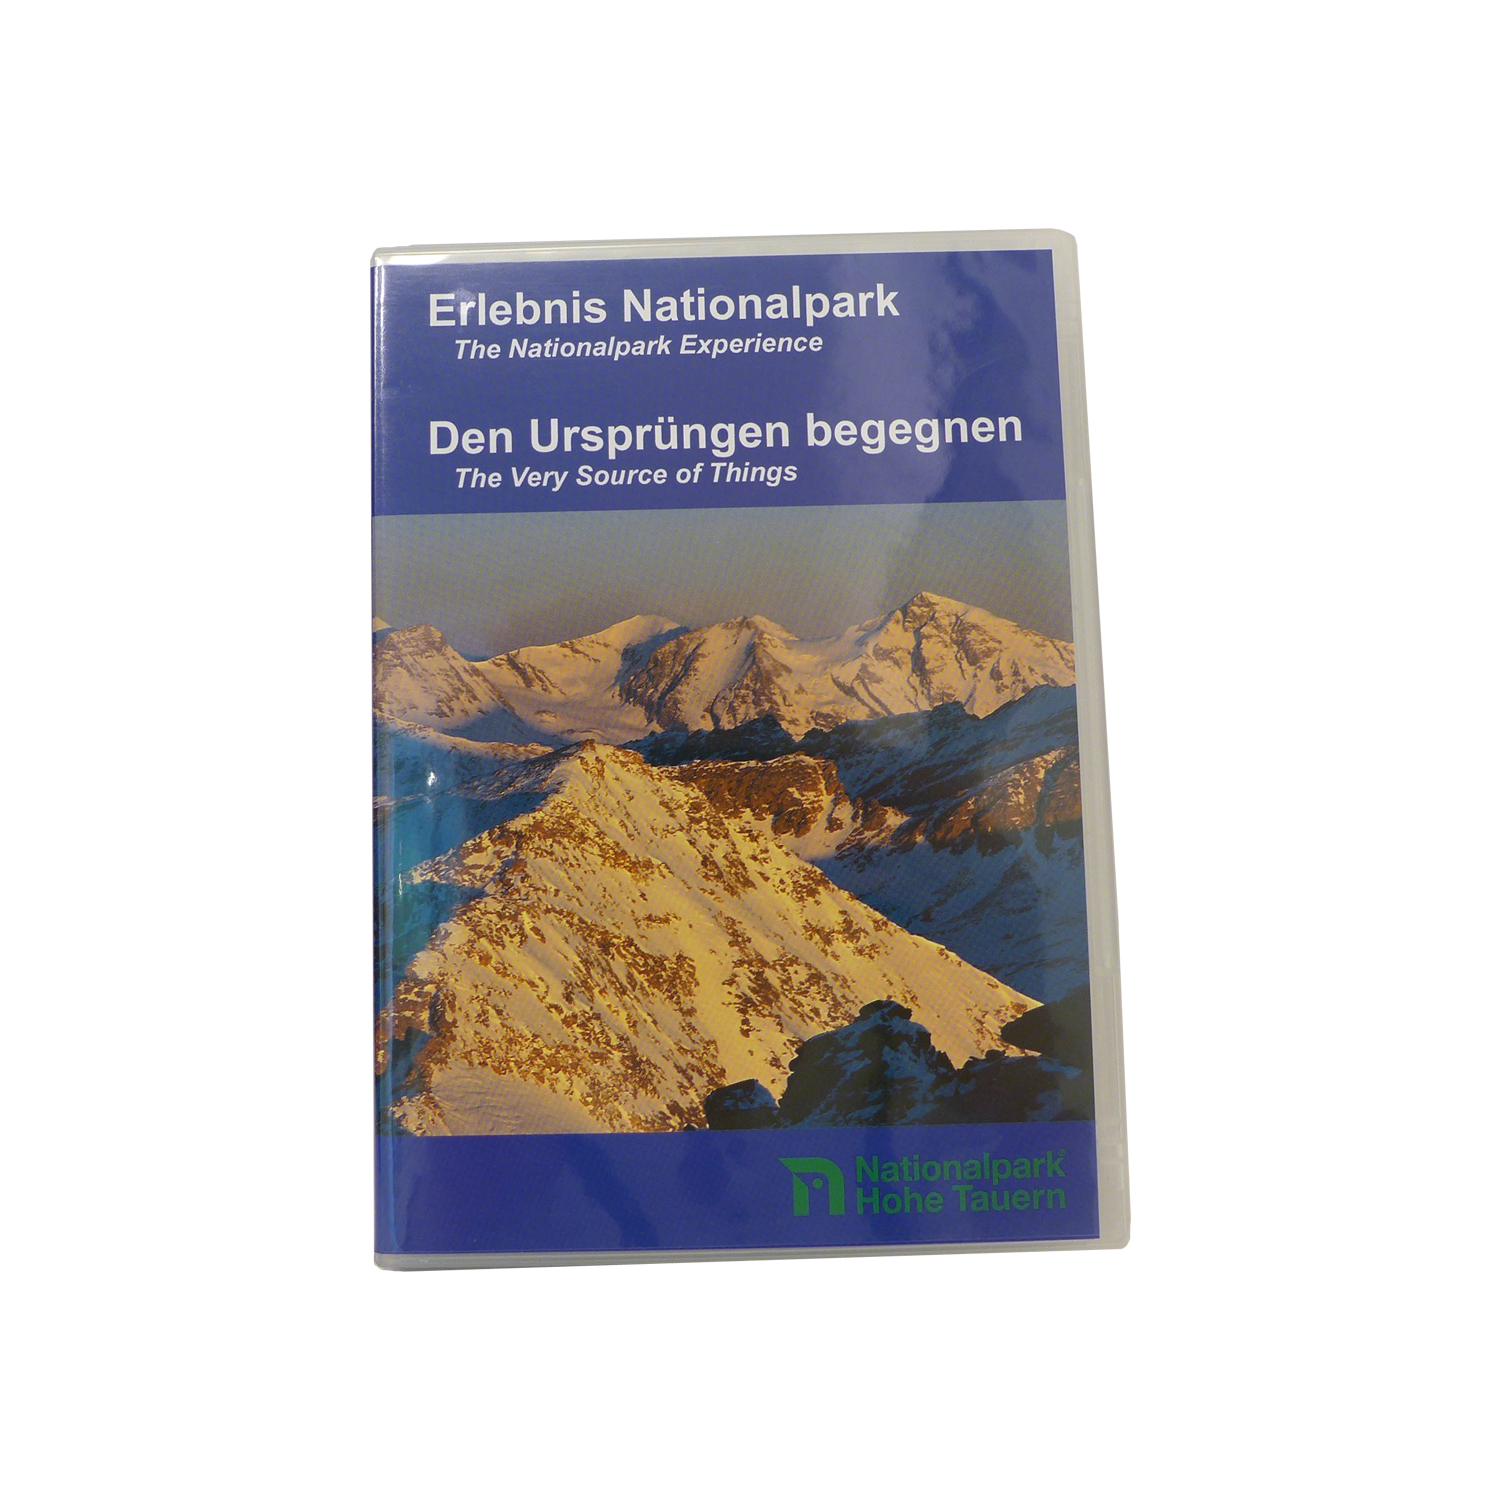 DVD – Hohe Tauern National Park experience 